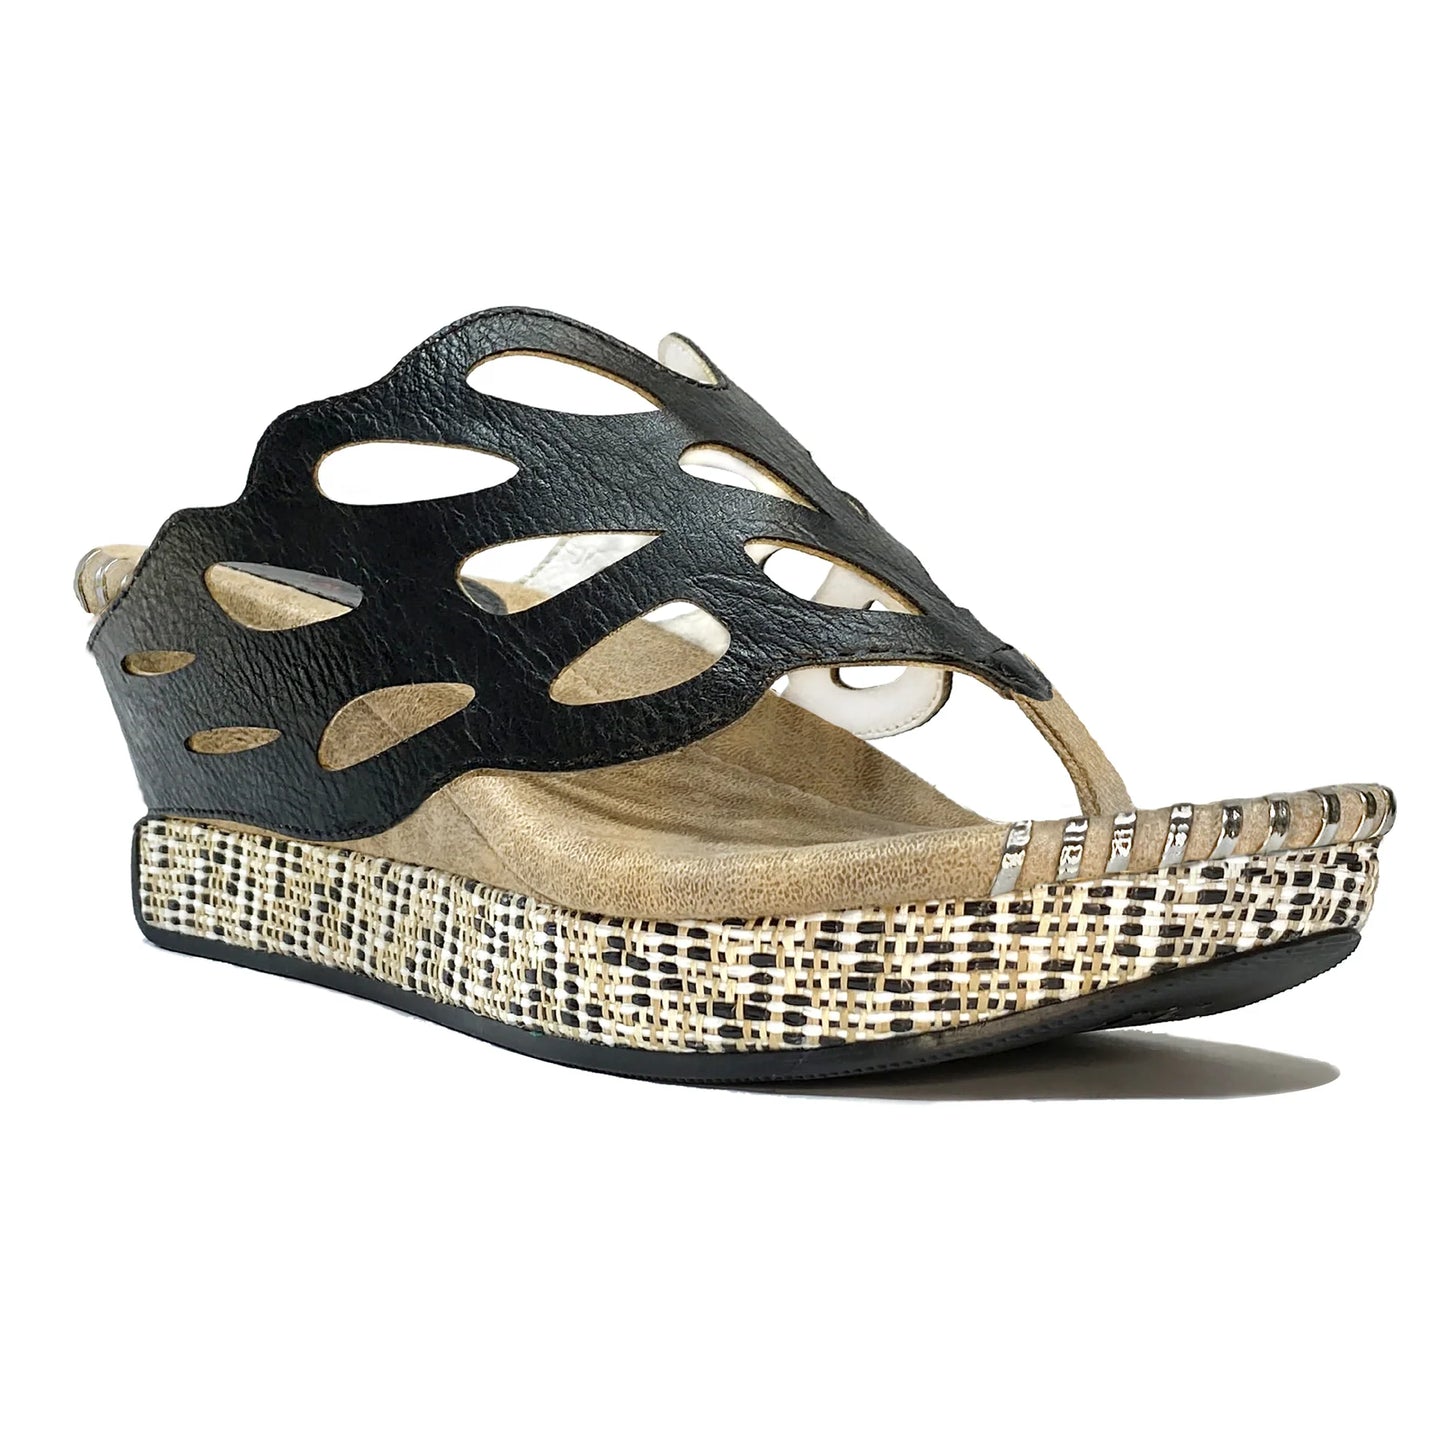 Reversible Sandals With Elegant Cut Out Design